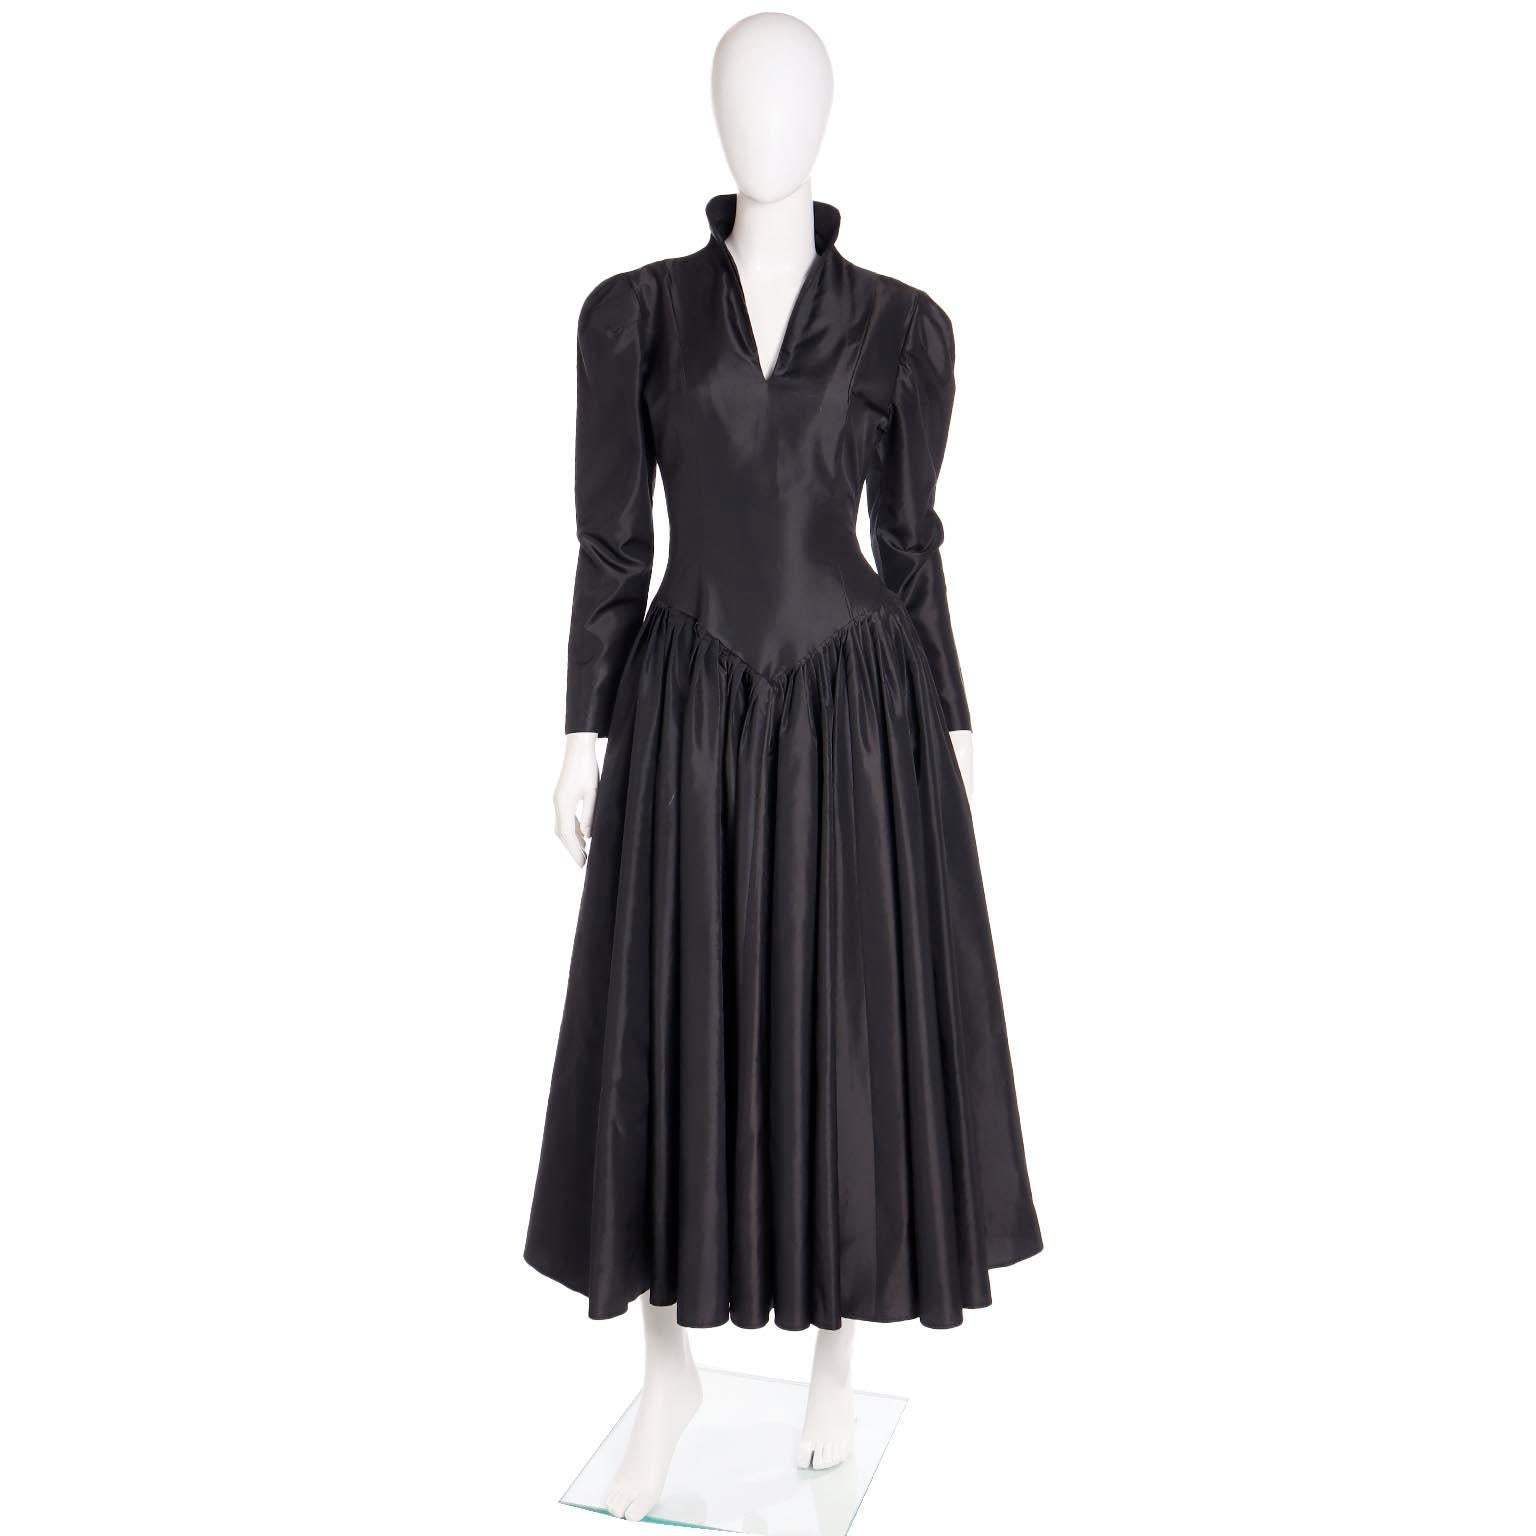 This is a sensational vintage 1980's Norma Kamali dress in a beautiful black satin taffeta. Norma Kamali often used the Victorian era as inspiration for her clothing and she was able to do it with a unique twist. Many designers today are trying to